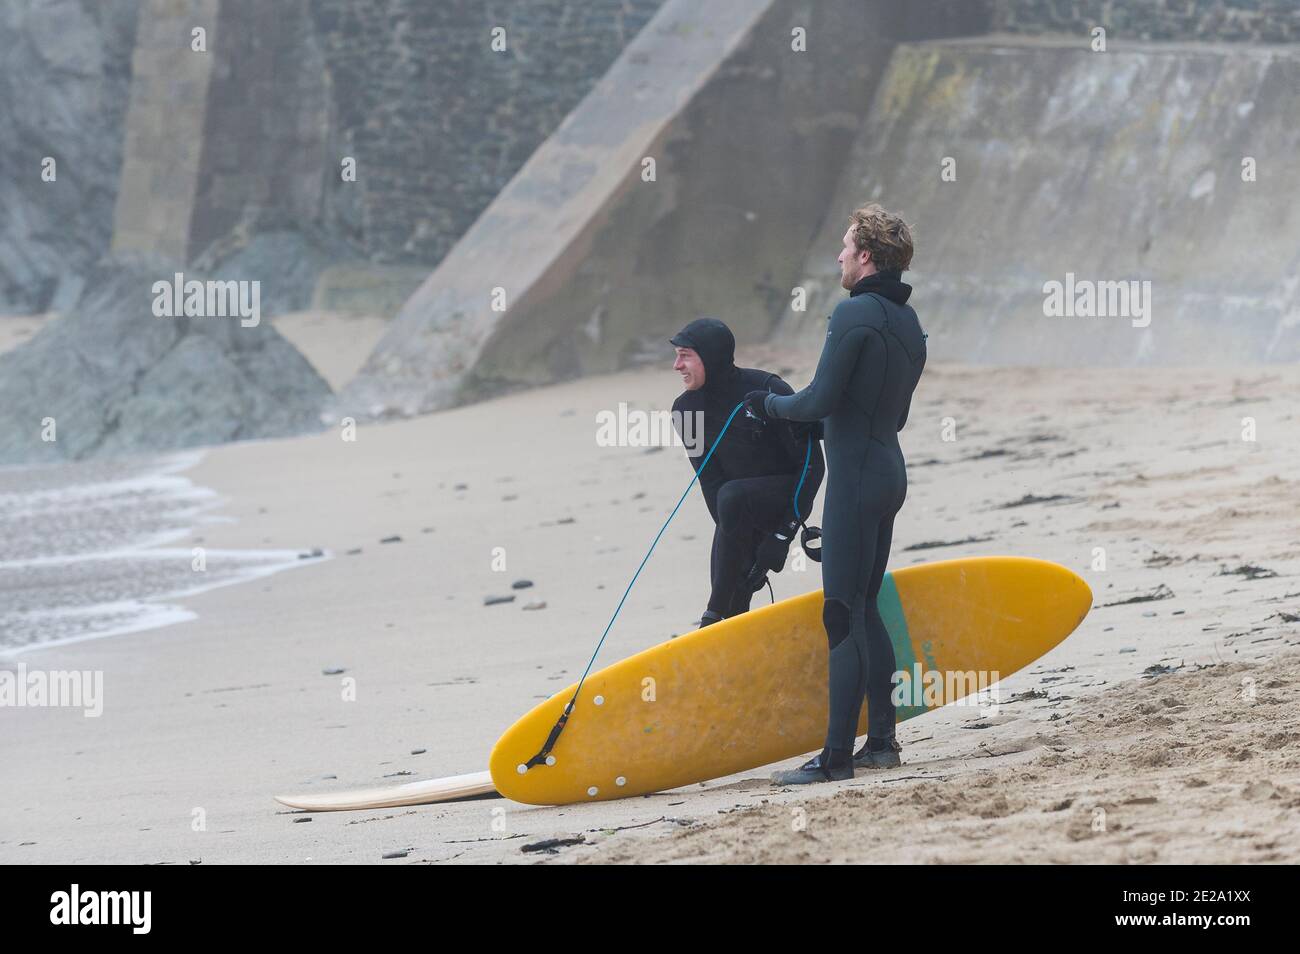 Surfers preparing to start a surfing session in freezing cold winter weather conditions on Great Western Beach in Newquay in Cornwall. Stock Photo